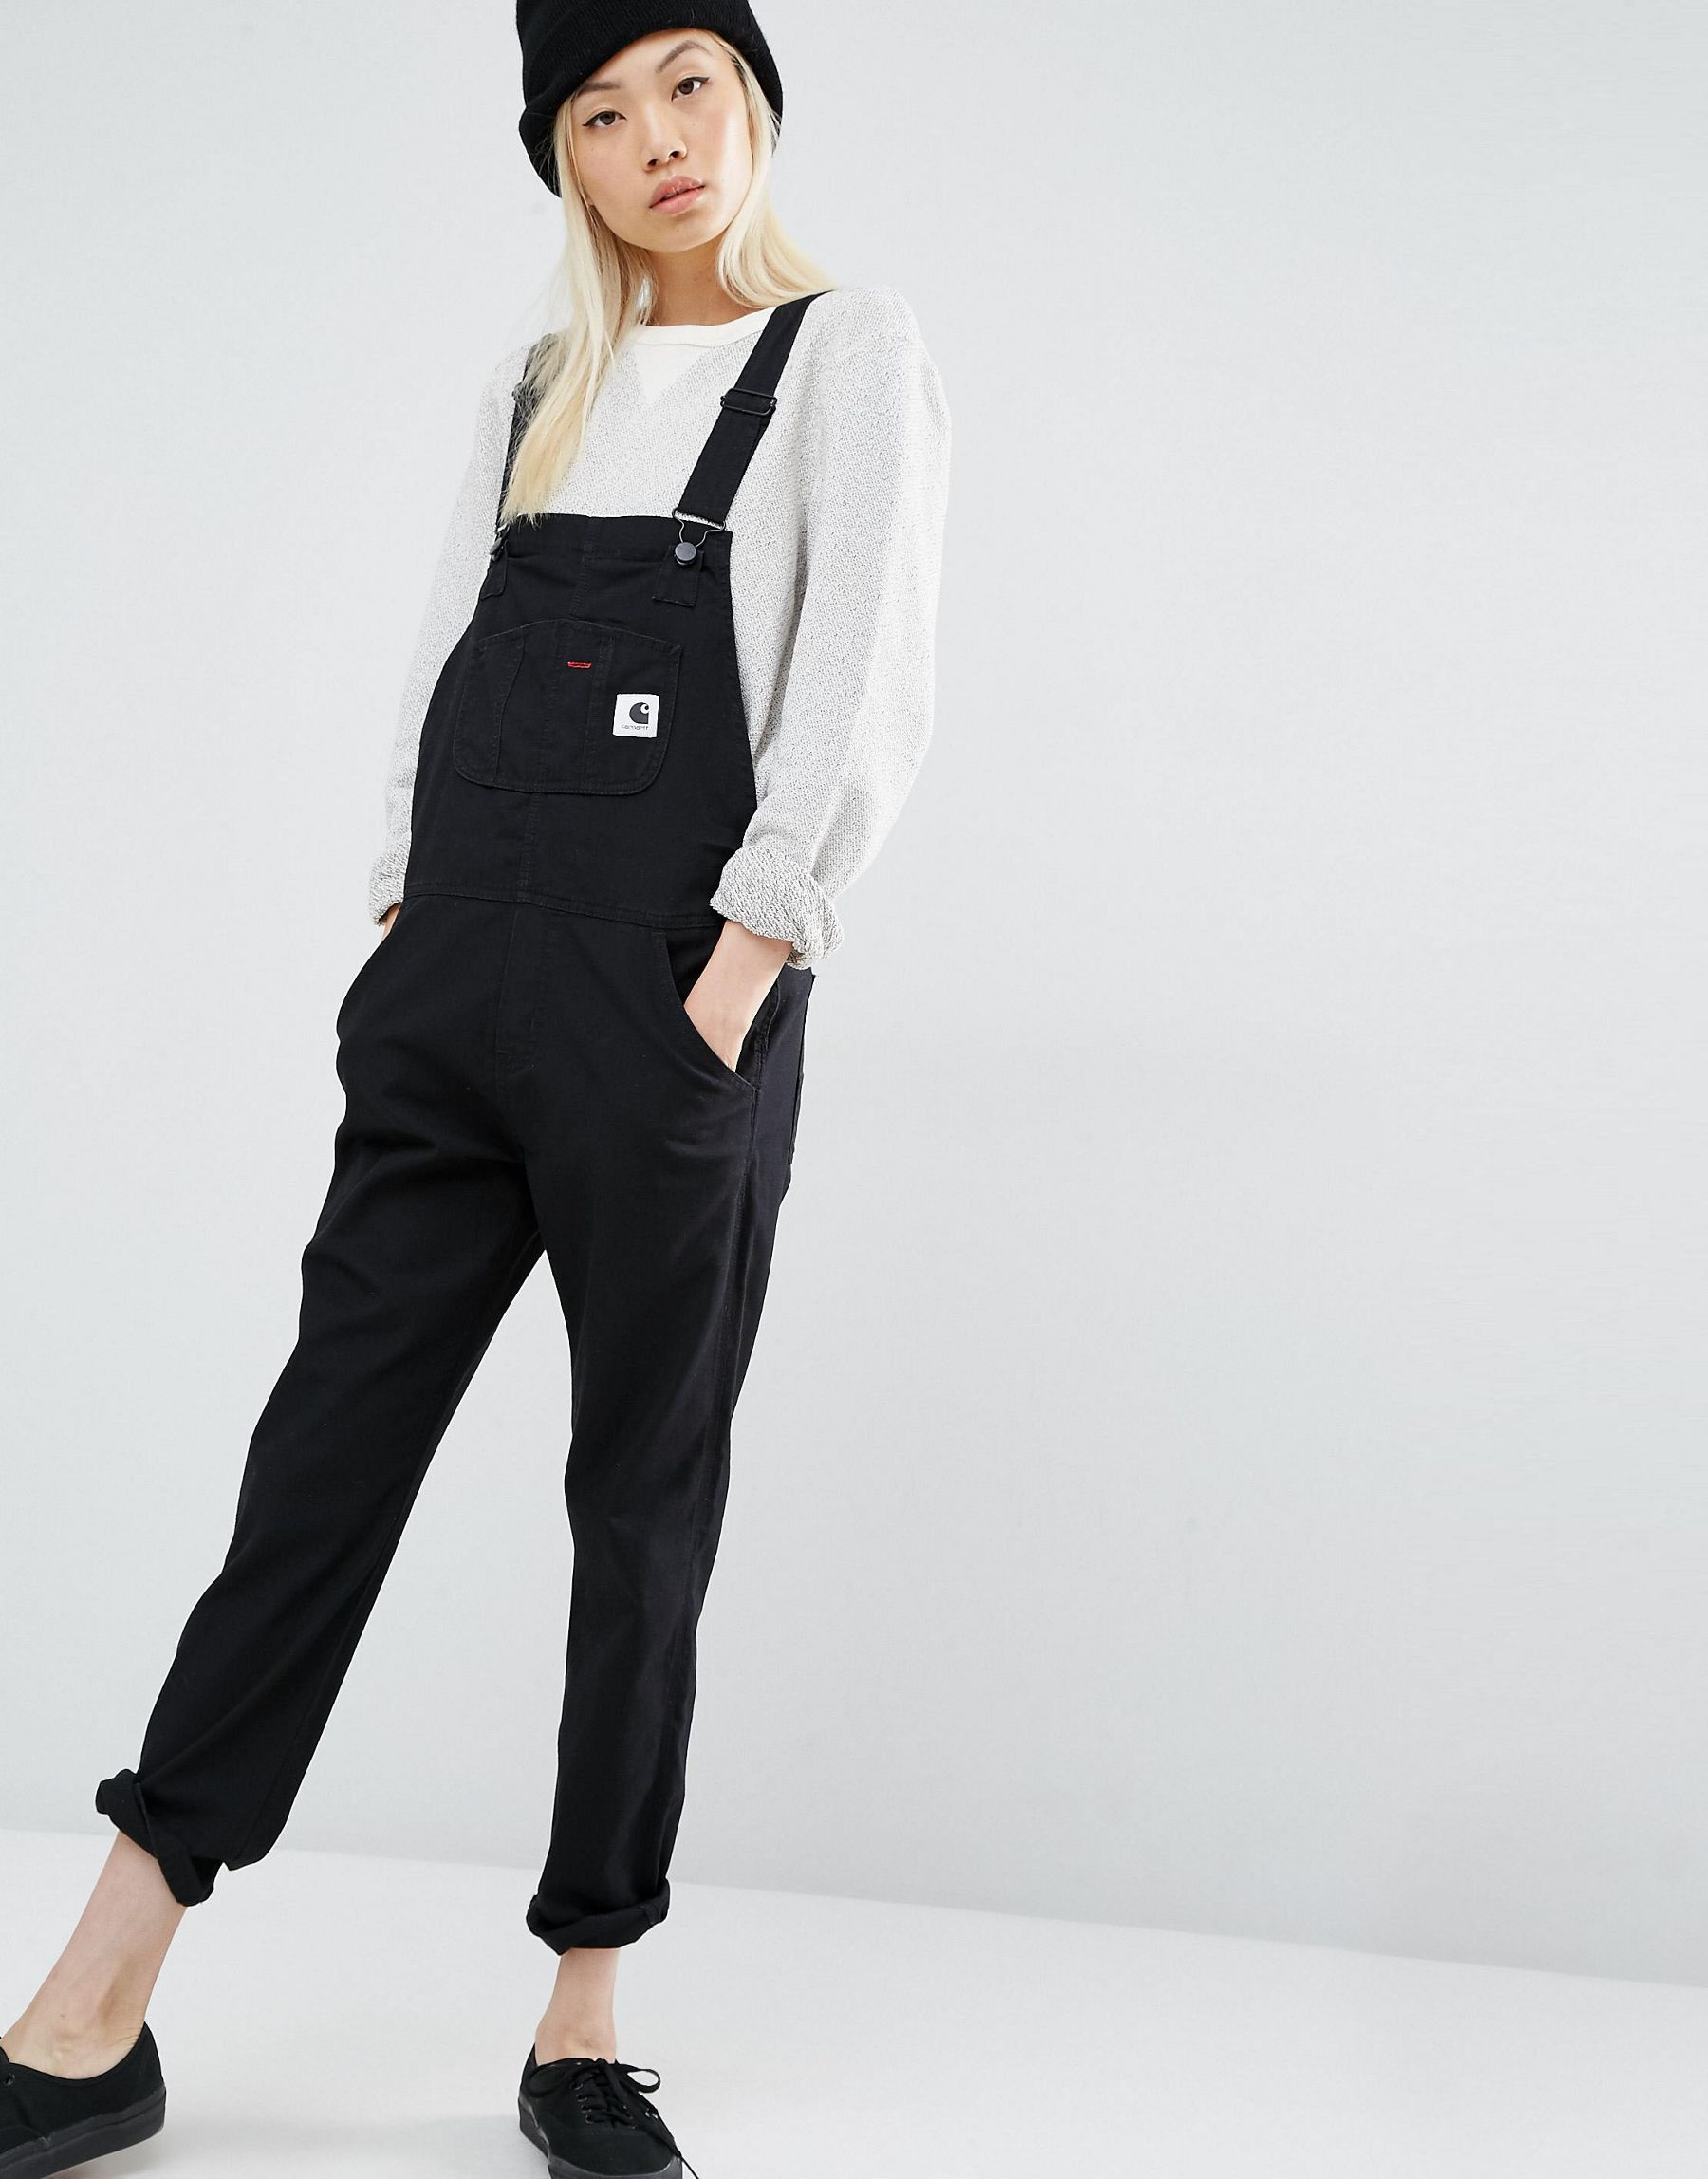 Carhartt WIP Denim Bib Overall Dungarees With Front Logo in Black | Lyst